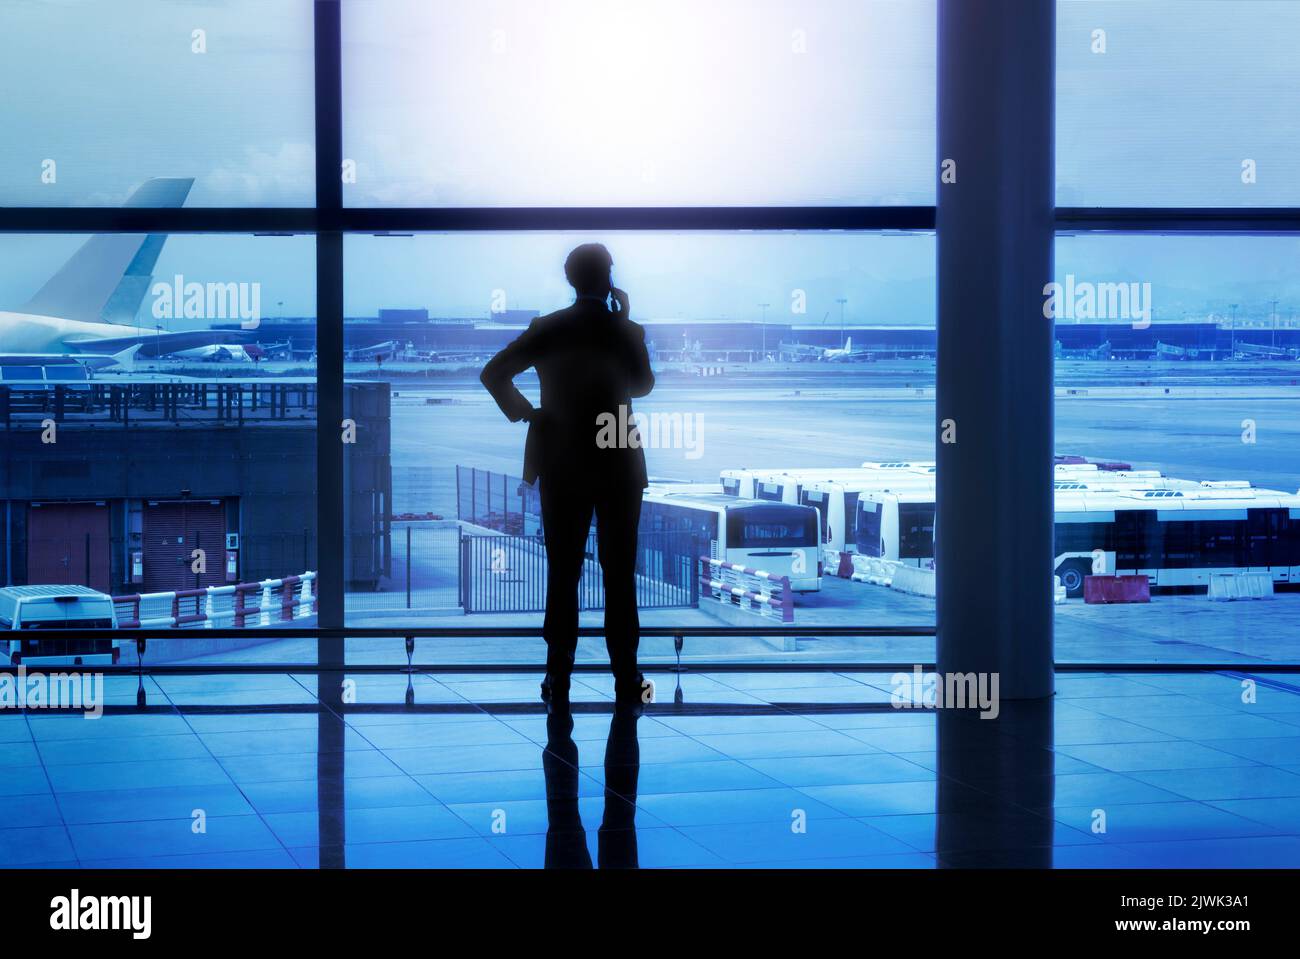 Businessman silhouette calling by phone in airport lobby in front of glass windows Stock Photo